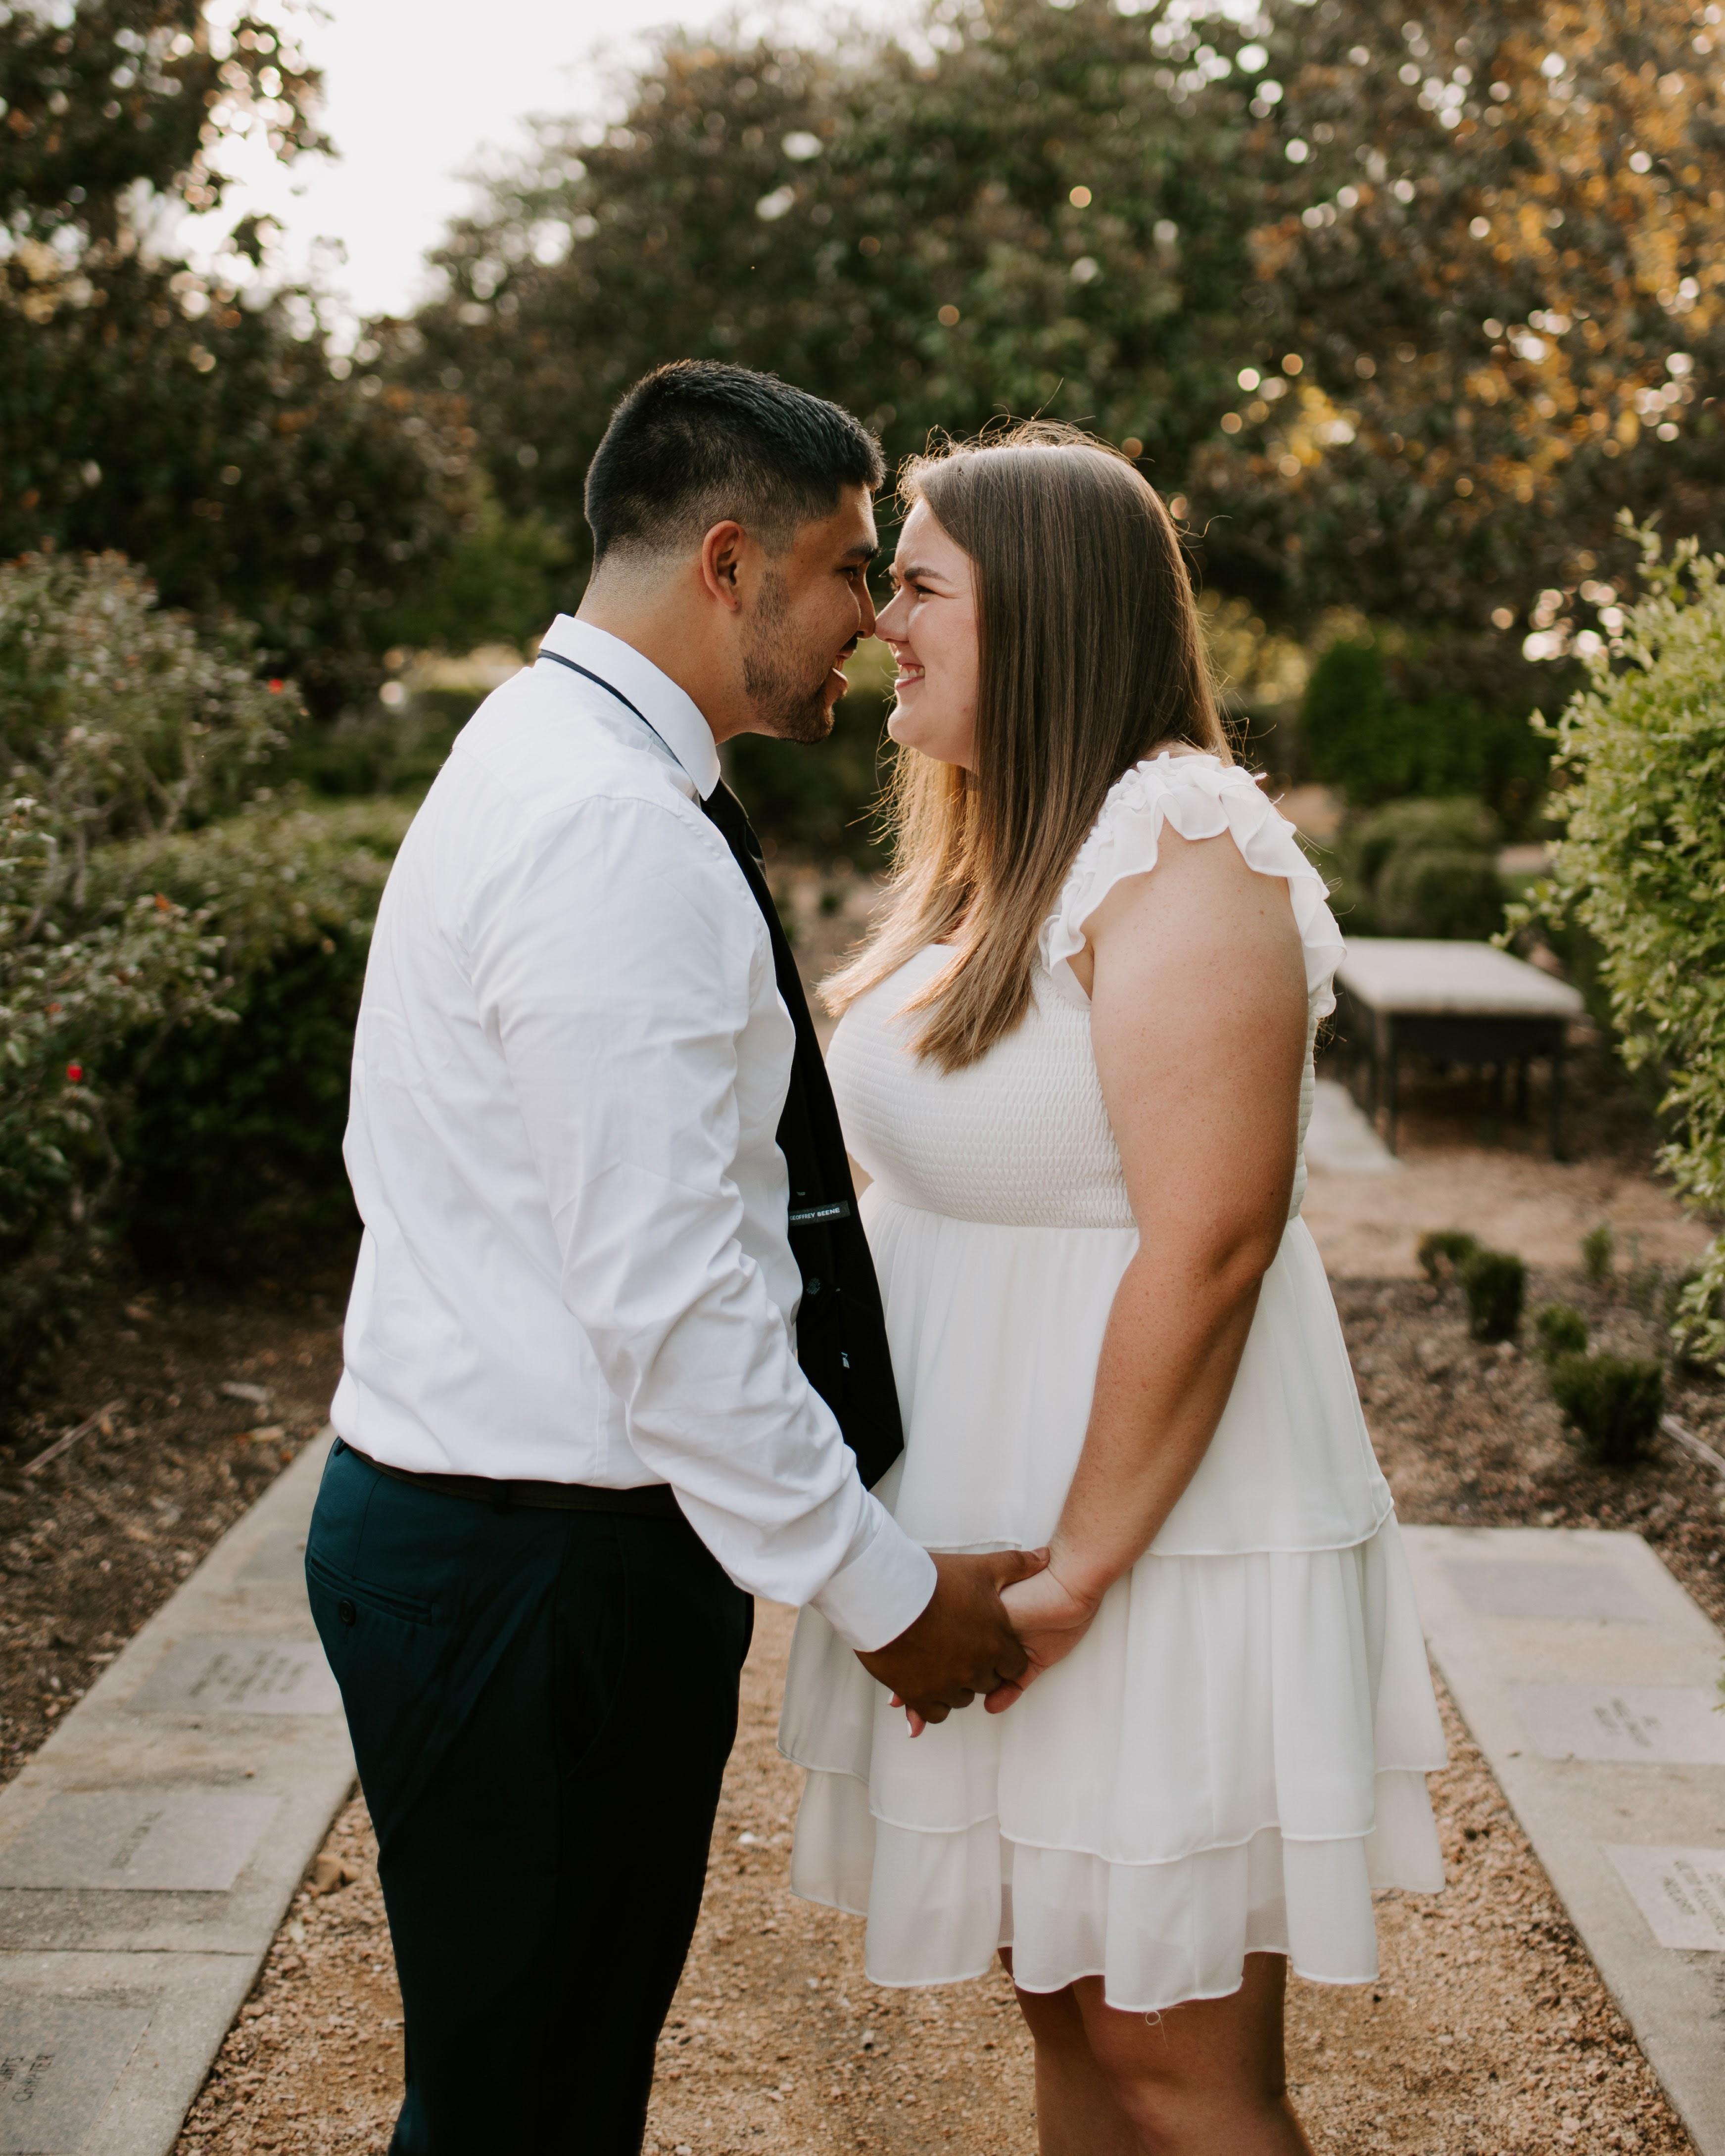 The Wedding Website of Haleigh Conklin and Adrian Rosas